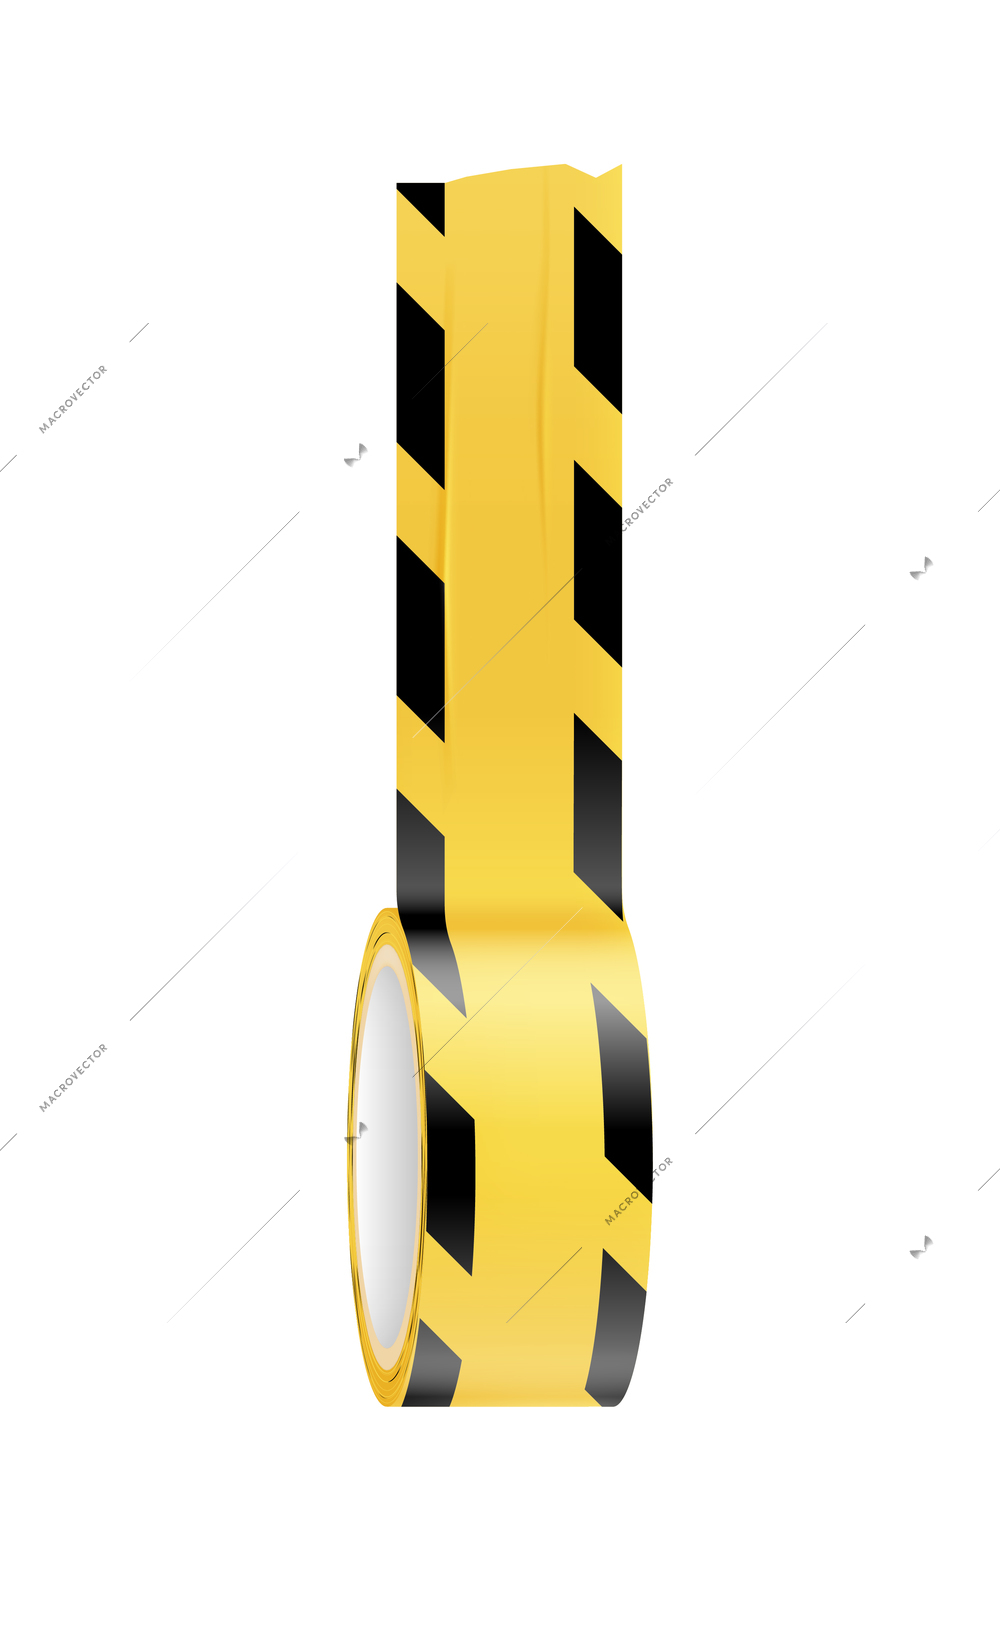 Realistic yellow and black caution adhesive tape vector illustration